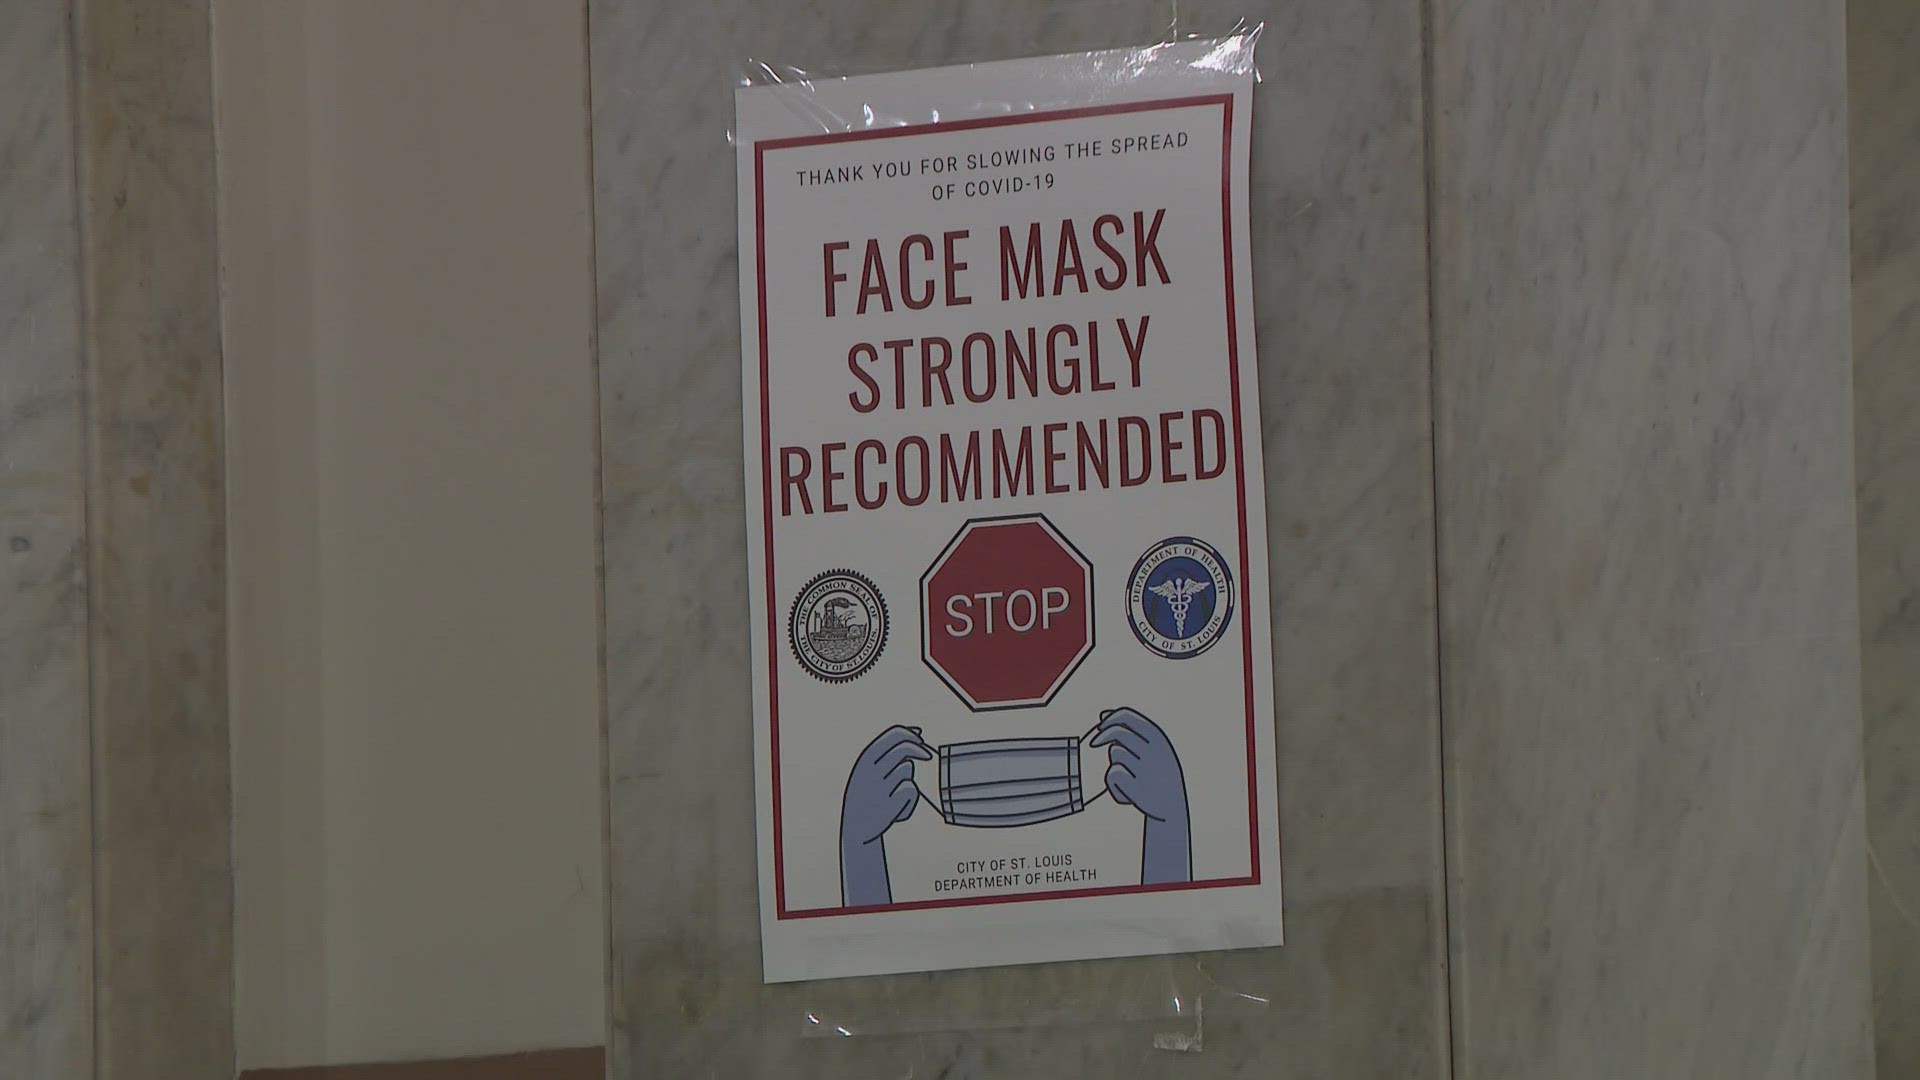 City of St. Louis officials announced Friday that it is no longer requiring city employees to wear a mask to work, less than 24 hours after issuing the mandate.